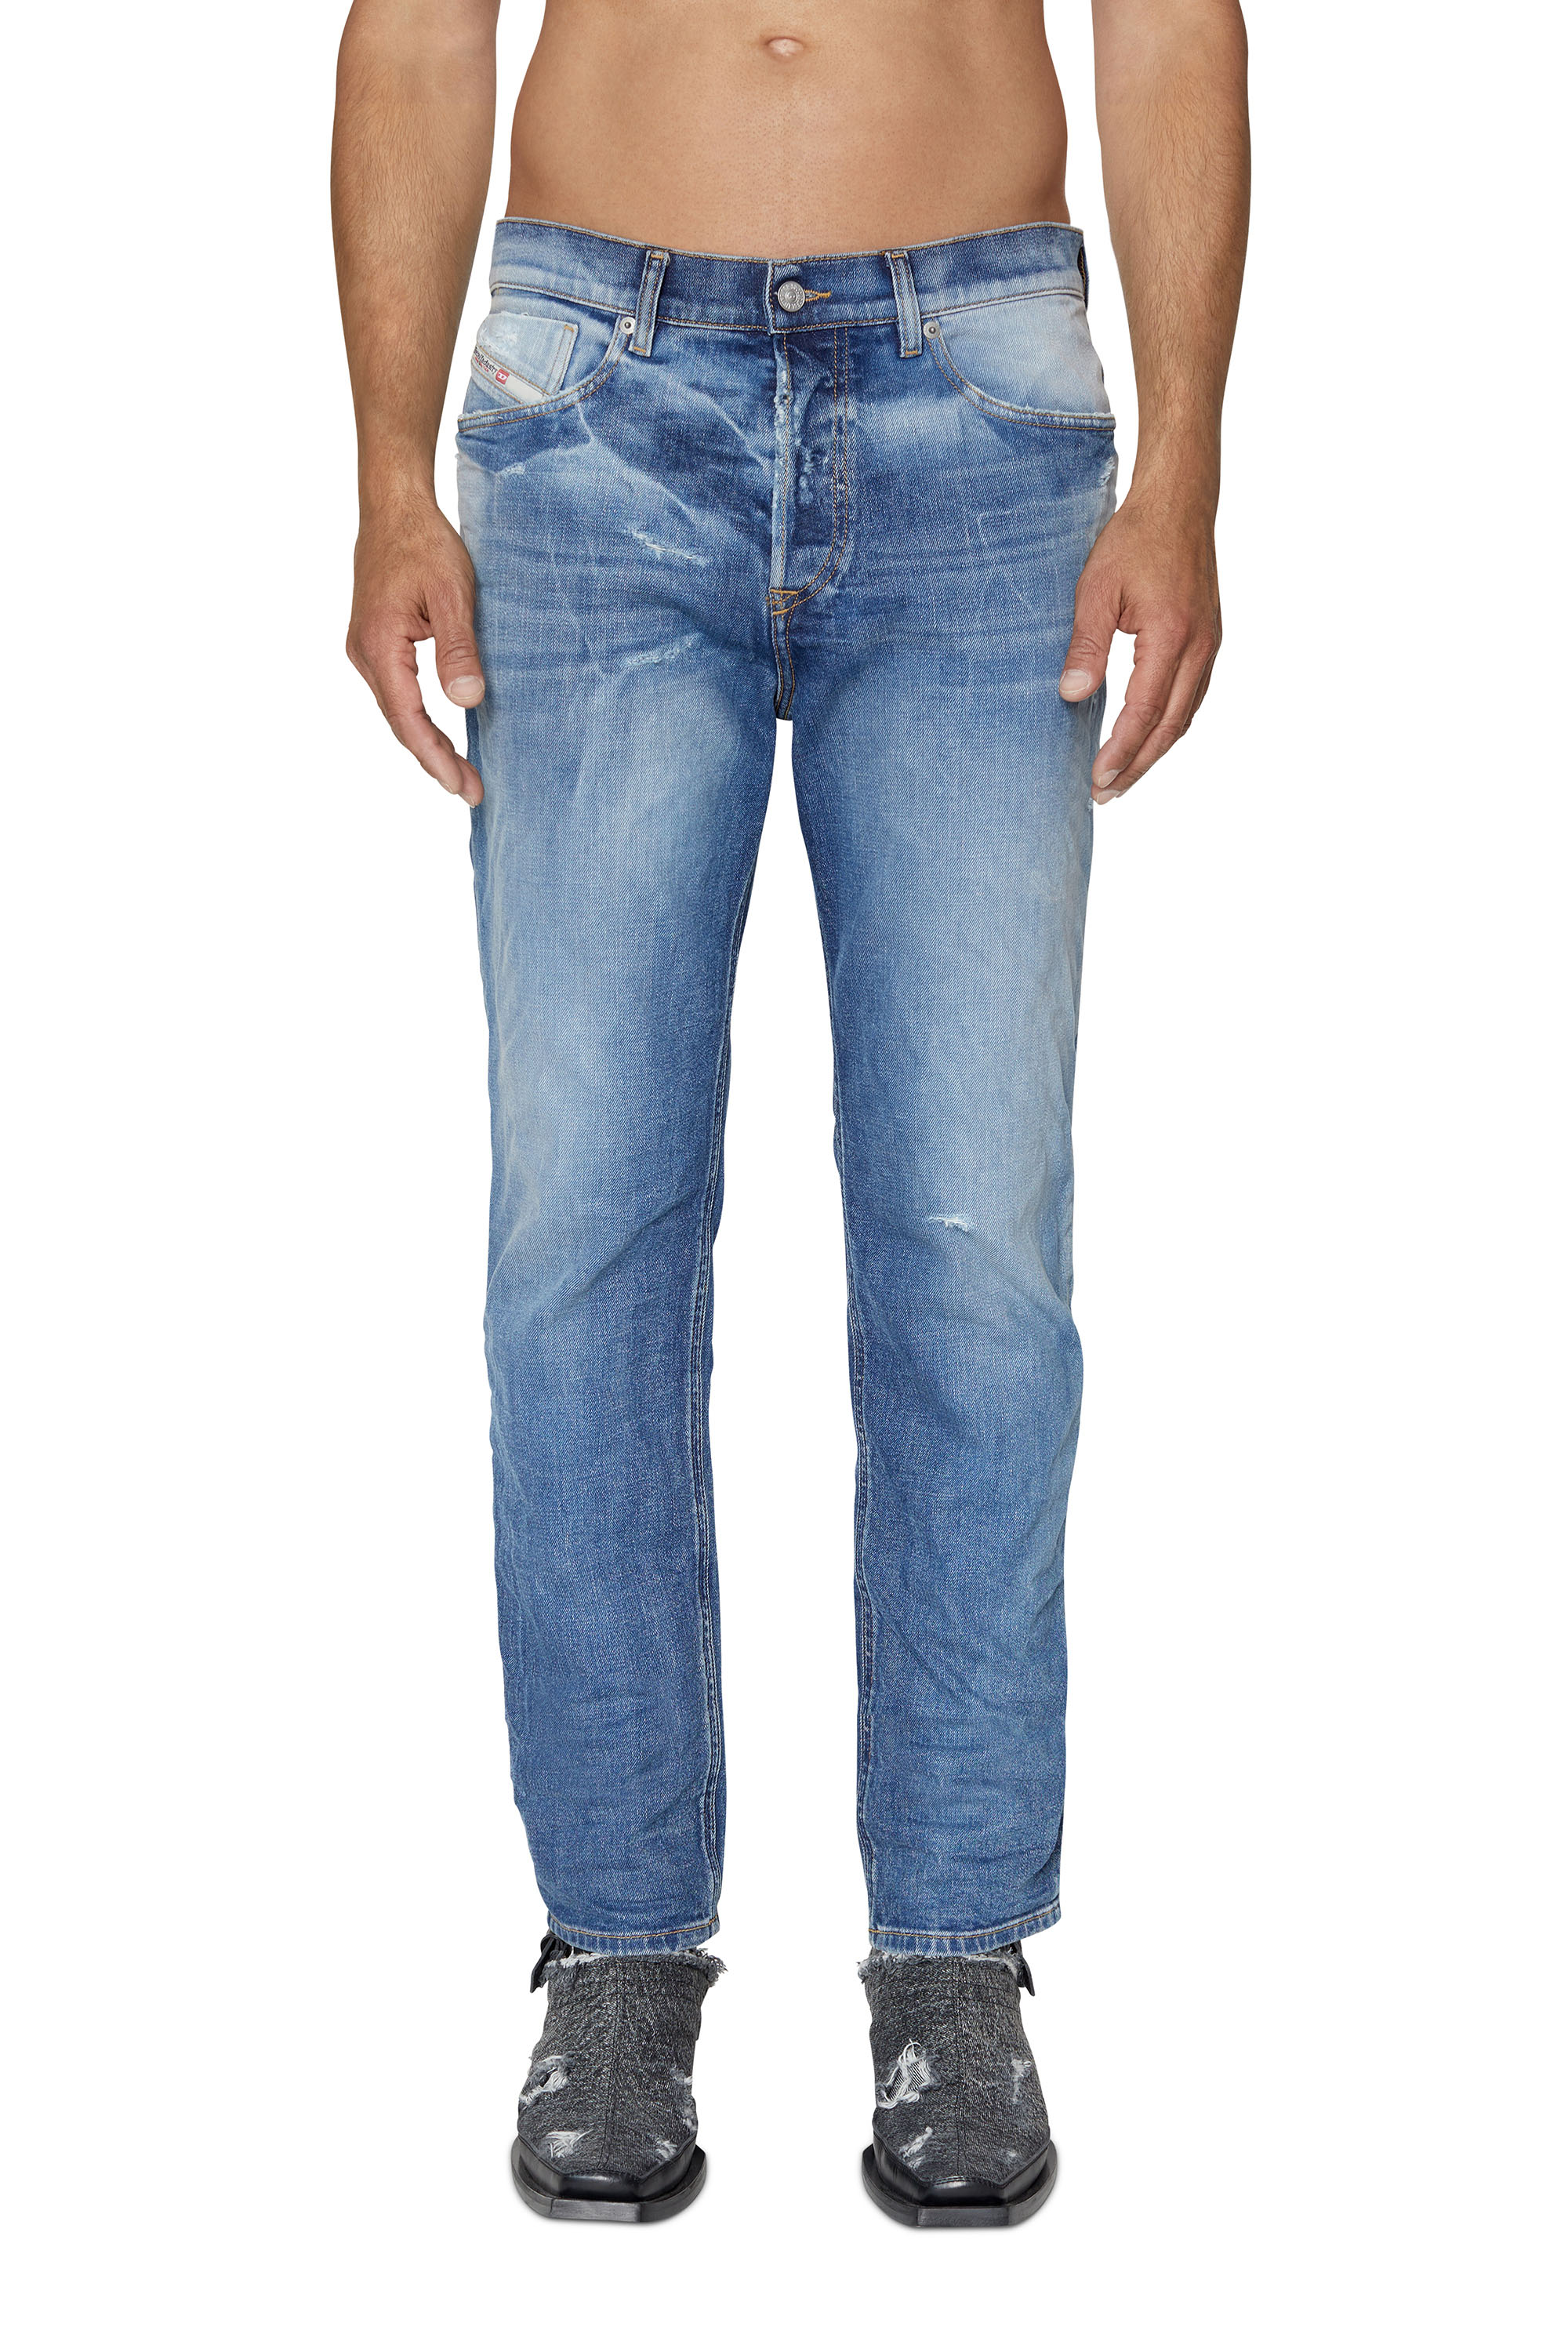 2005 D-FINING 09E16 Tapered Jeans, Mittelblau - Jeans